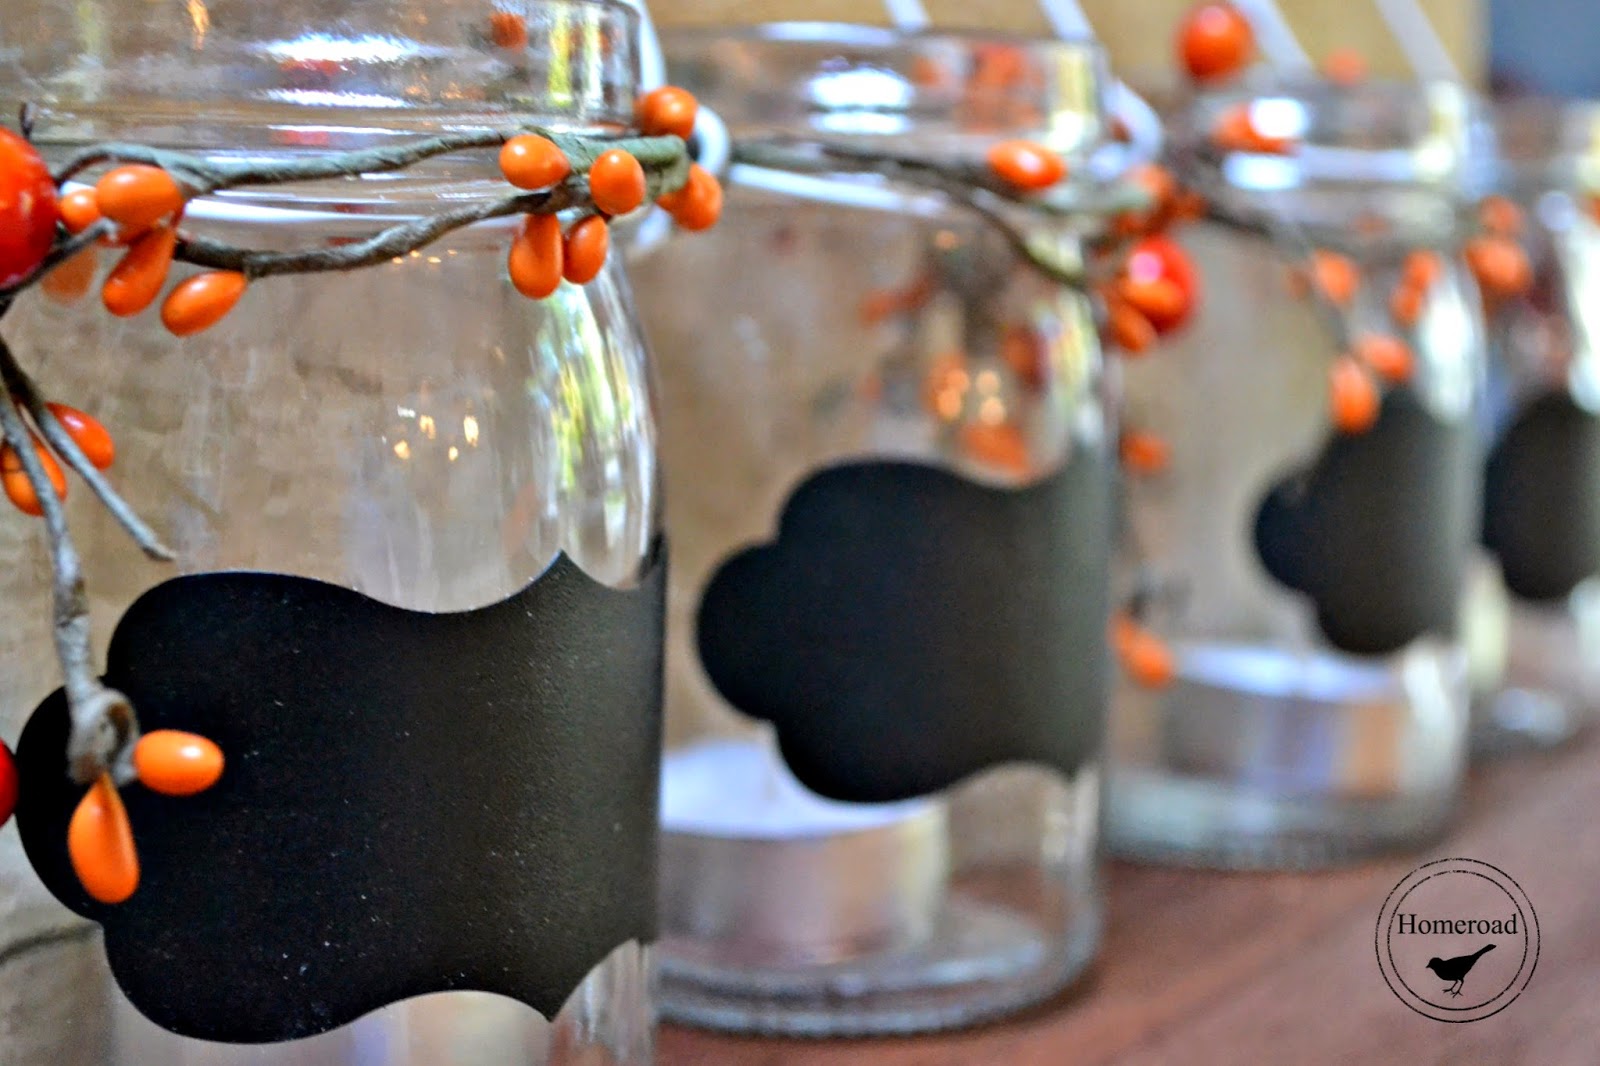 Row of jars with chalkboard labels